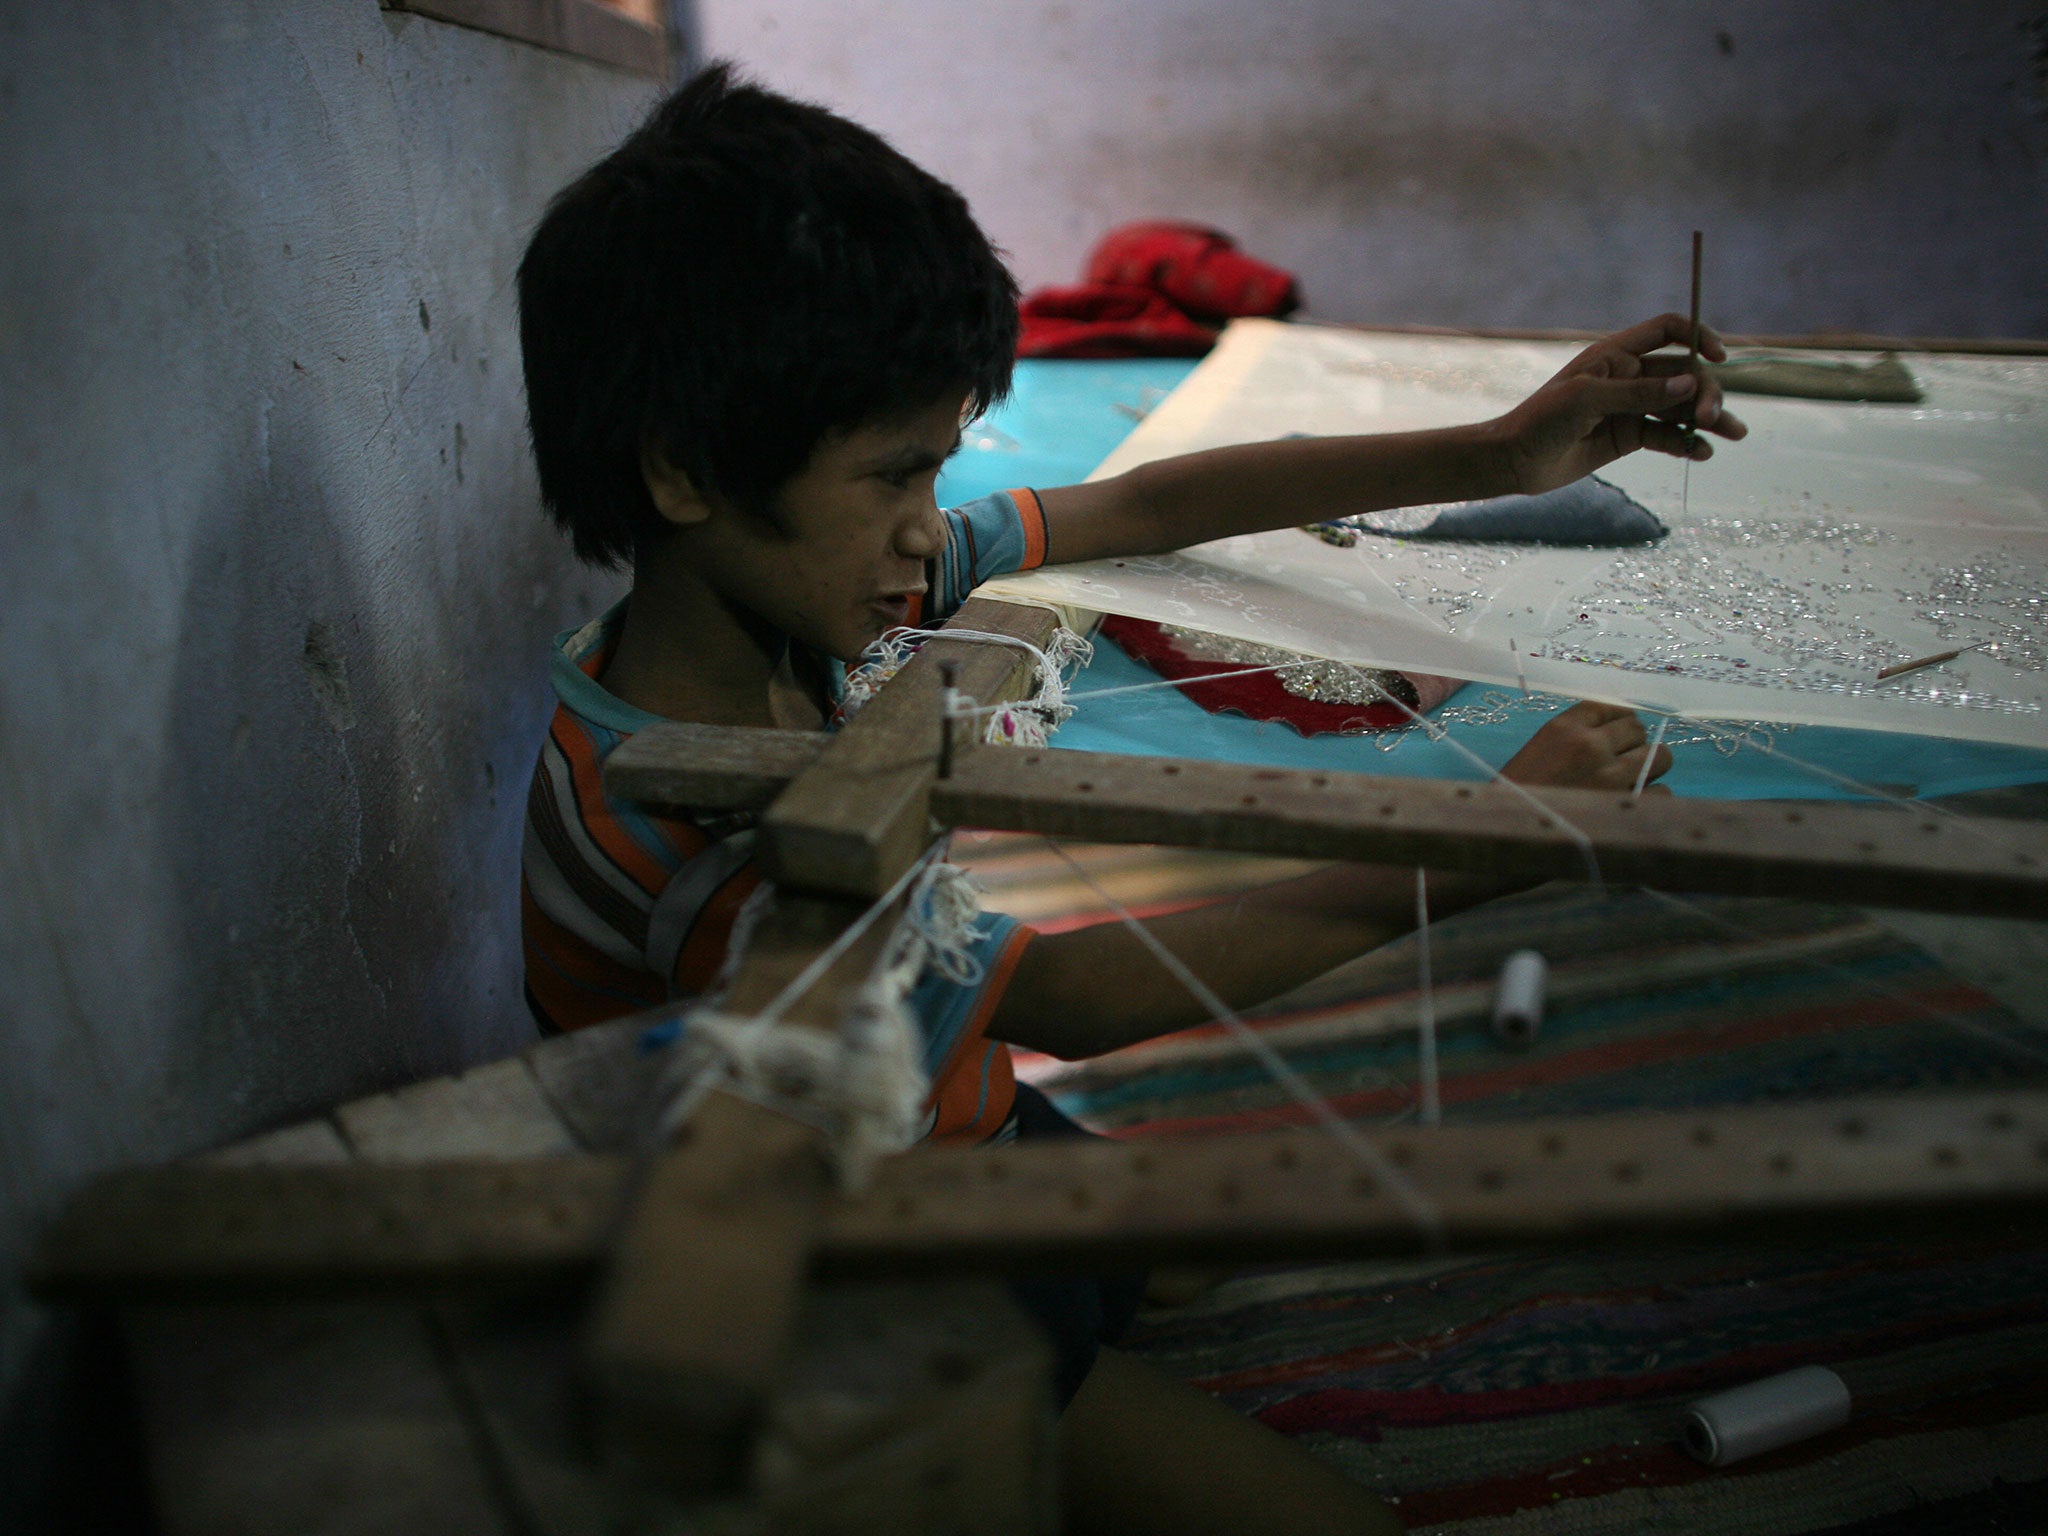 An Indian child sews sequins on to a garment in a workshop in Delhi. Currently, children under 14 are allowed to work in ‘non-hazardous’ occupations